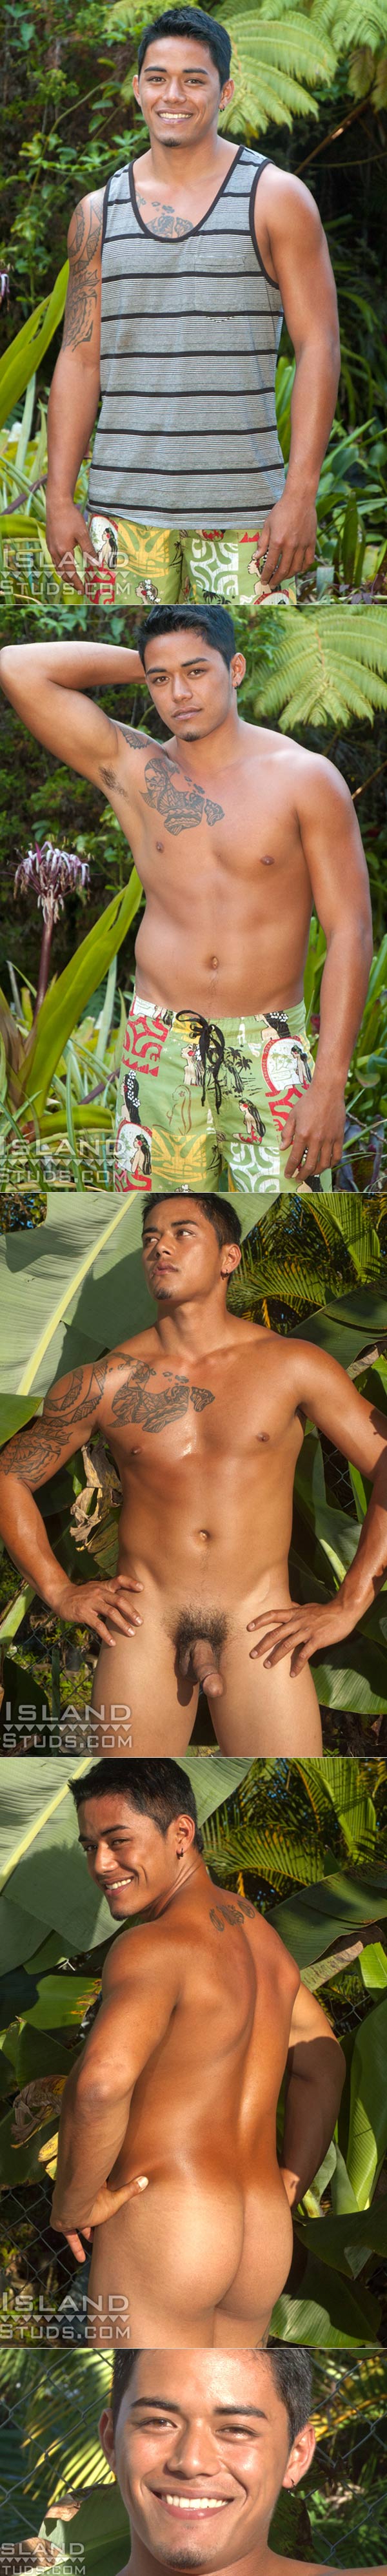 Keoni (Handsome Hawaiian with a Bubble Butt!) at IslandStuds